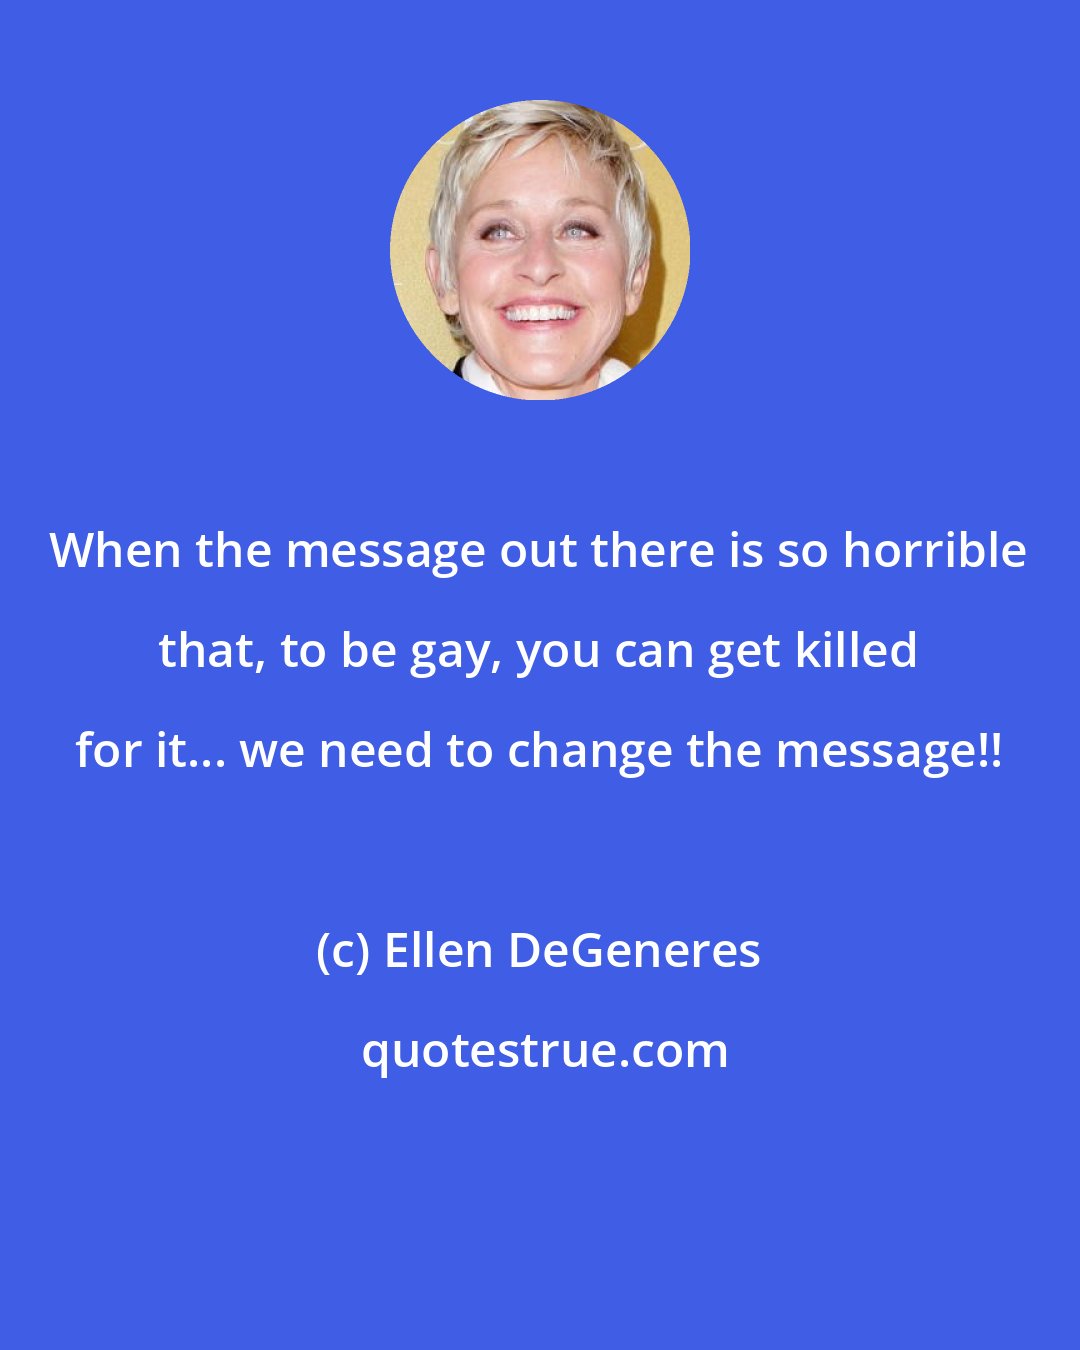 Ellen DeGeneres: When the message out there is so horrible that, to be gay, you can get killed for it... we need to change the message!!